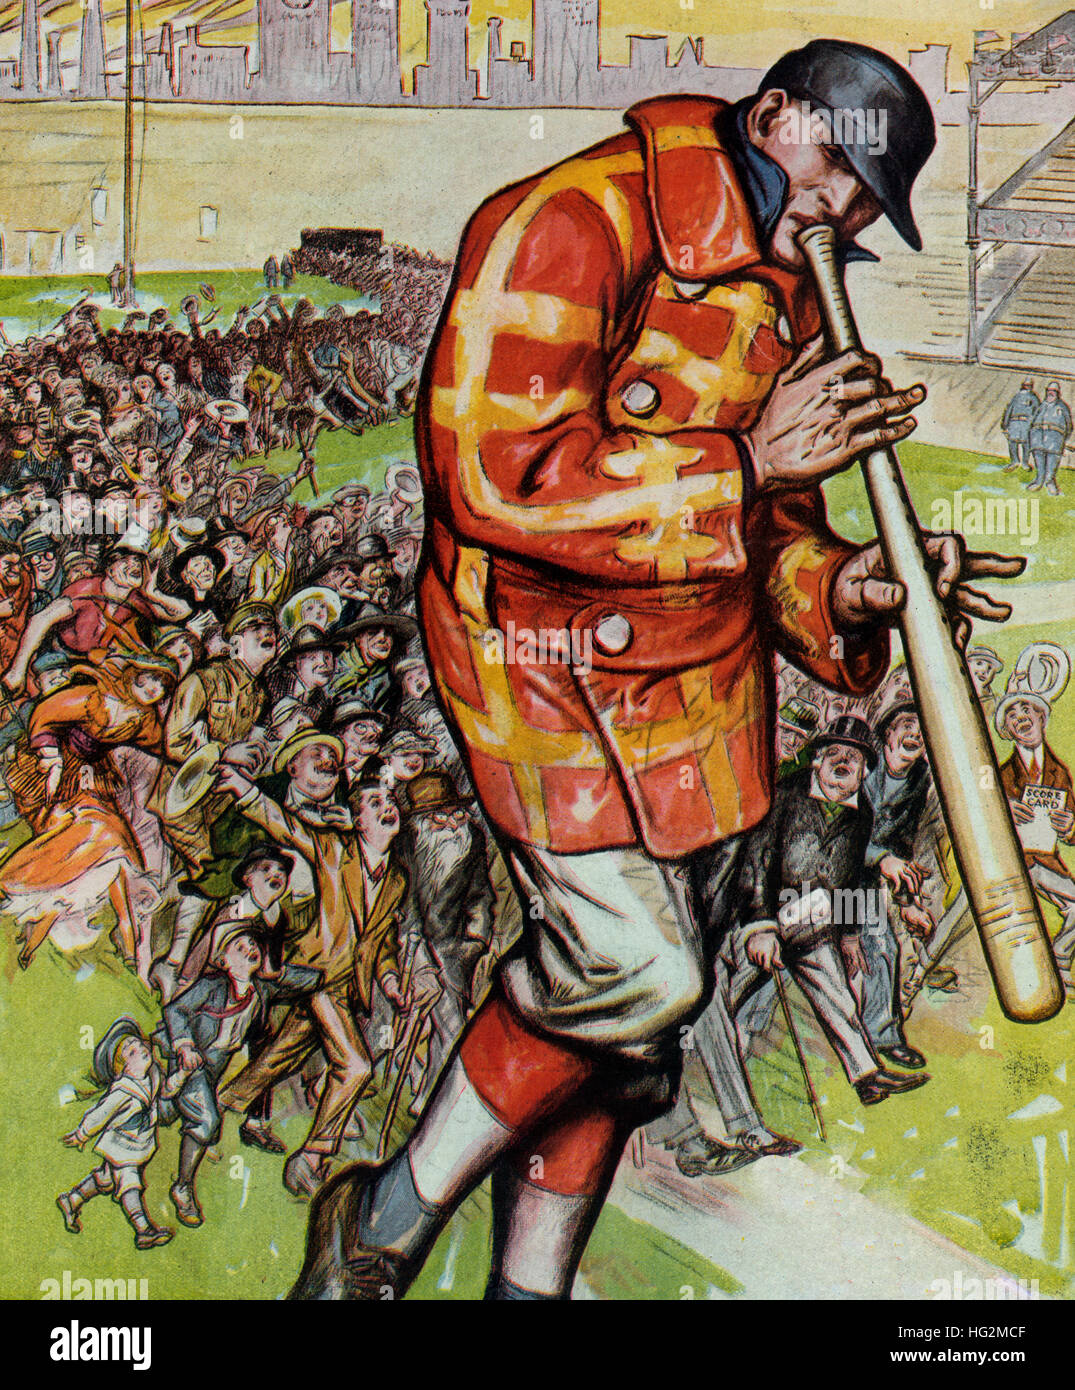 The pied piper of America -  Illustration shows a large baseball player using a baseball bat as a musical pipe to play music and draw a large crowd of people of all ages into a baseball stadium. 1914 Stock Photo